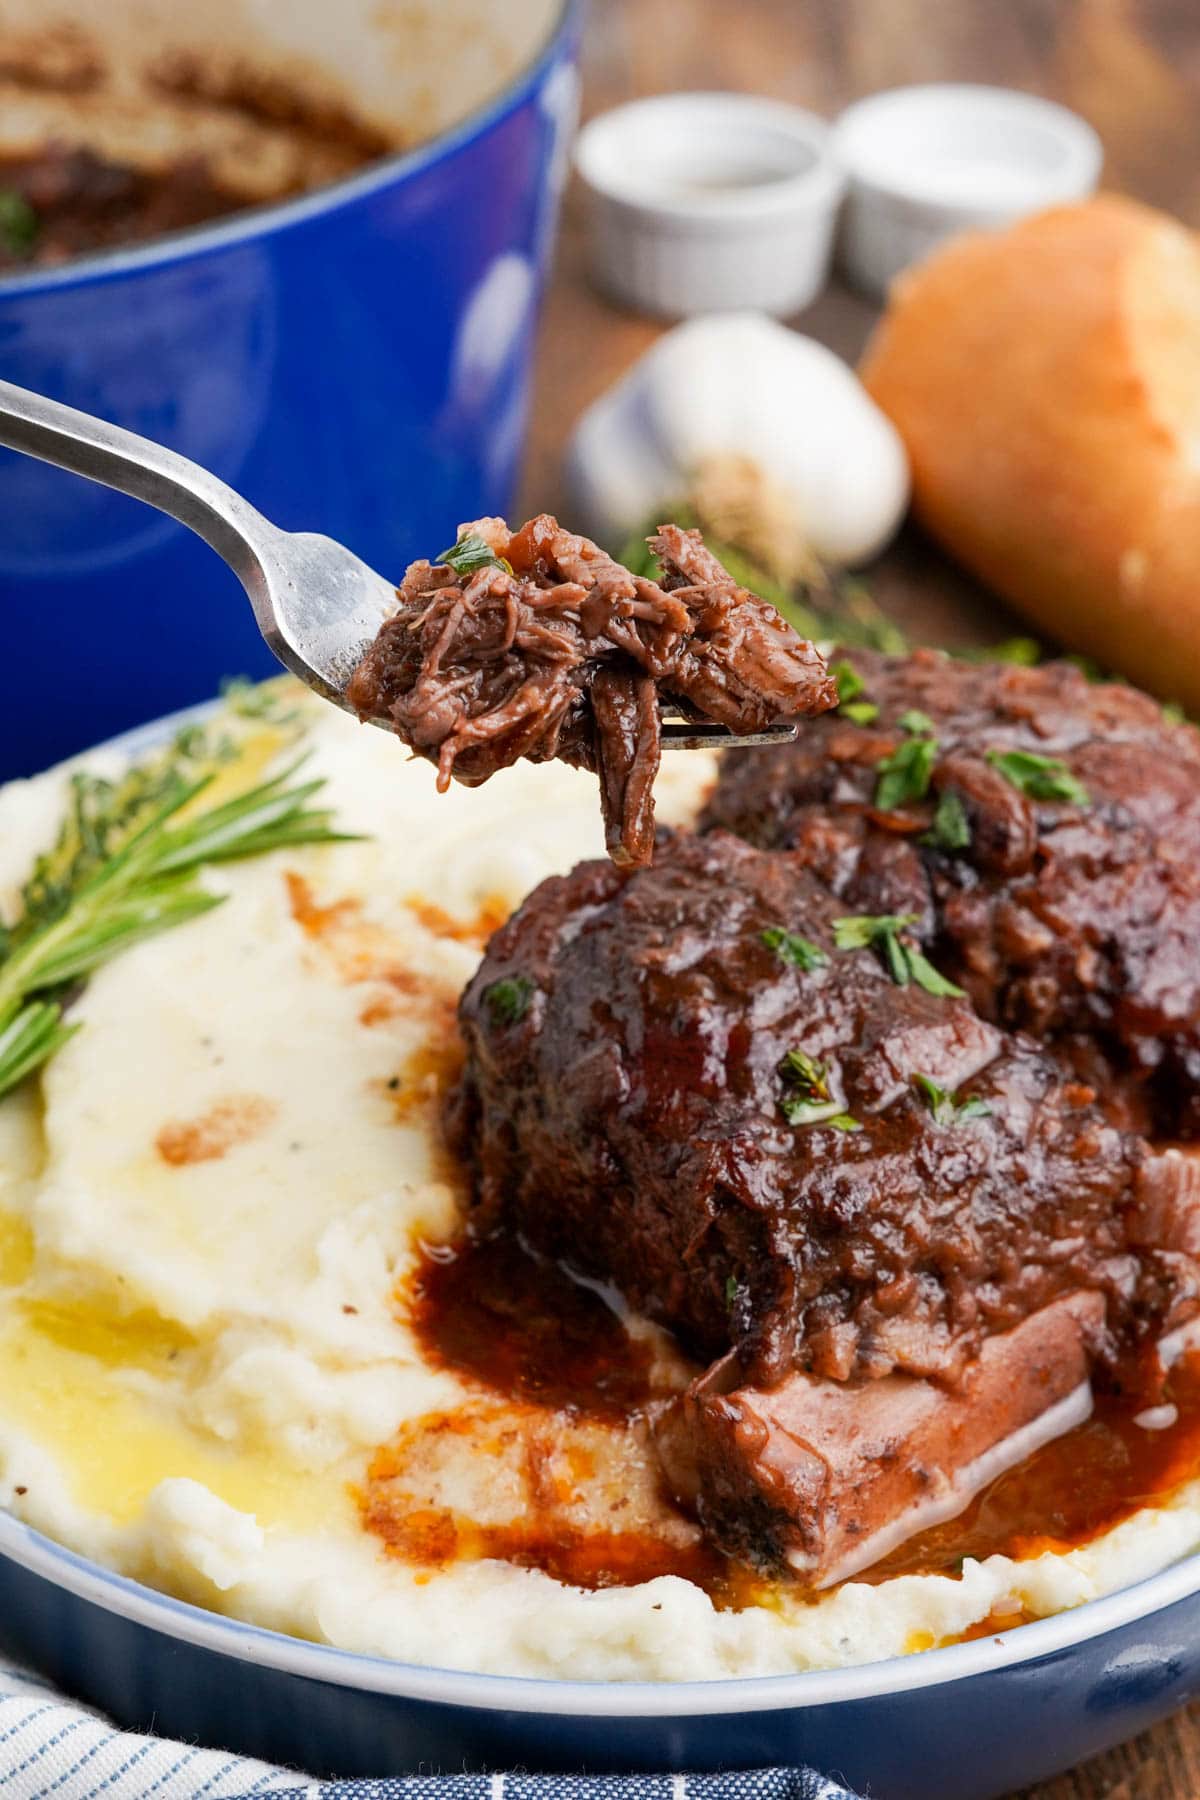 Plate of mashed potatoes and short ribs, fork raising a piece of beef.